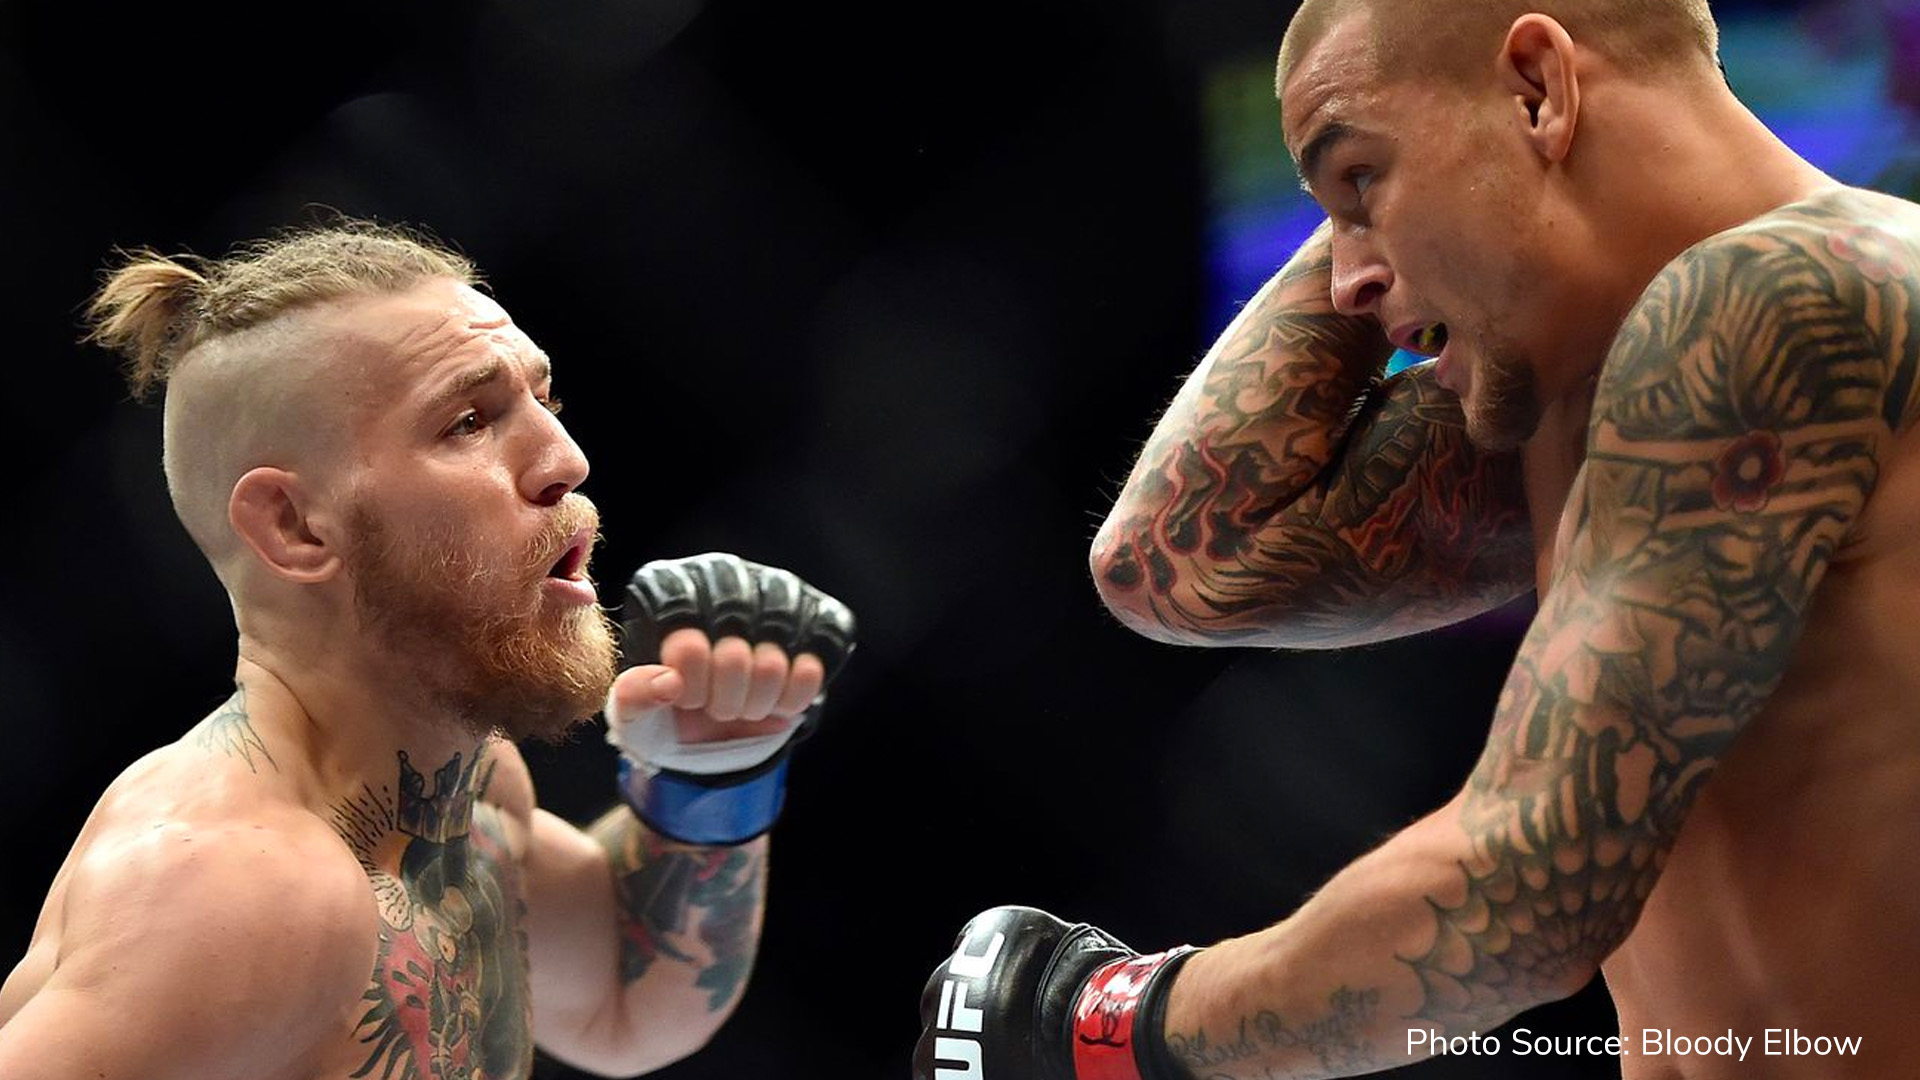 Conor McGregor accepts third match against Dustin Poirier on July 10th